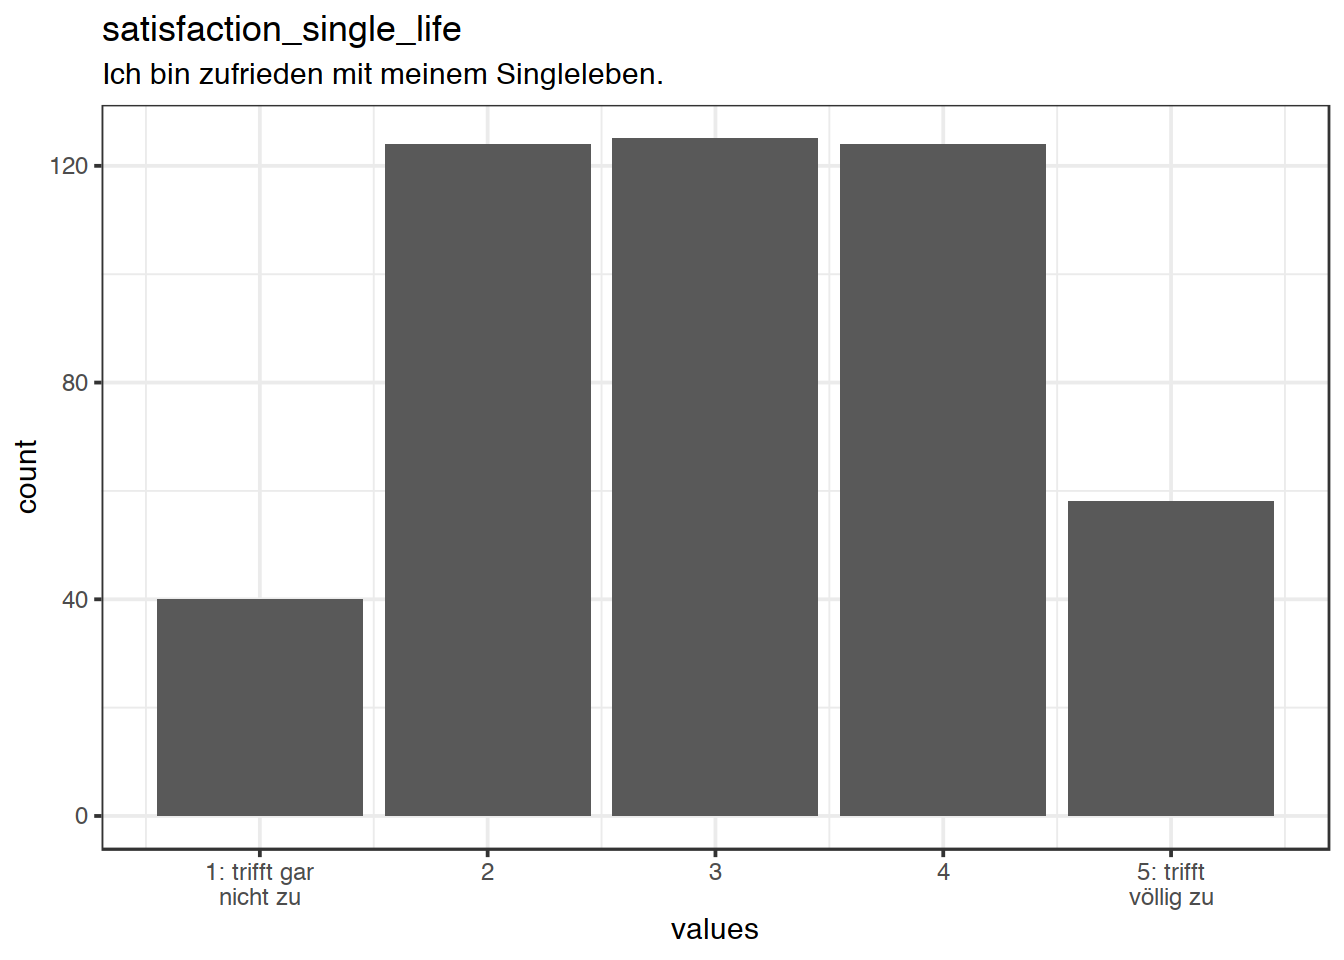 Distribution of values for satisfaction_single_life